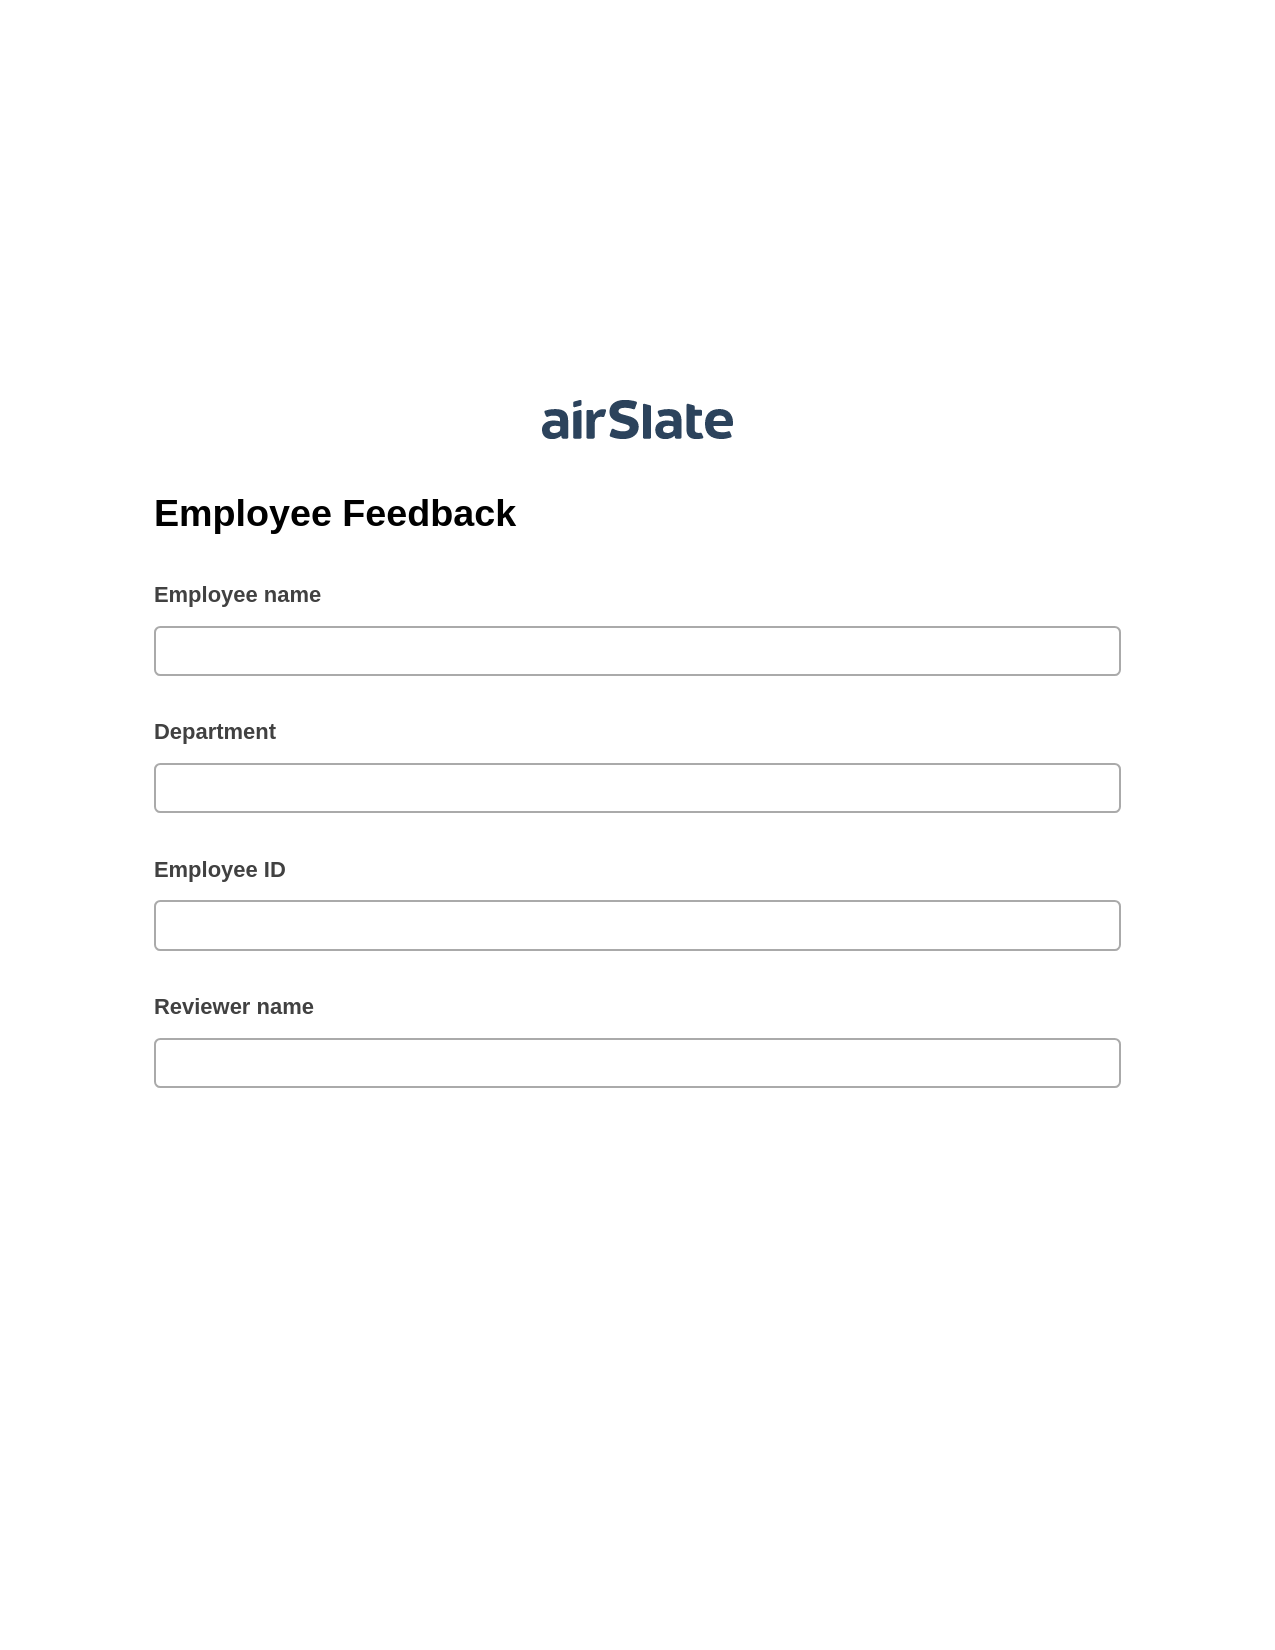 Employee Feedback Pre-fill Dropdowns from Smartsheet Bot, Update MS Dynamics 365 Record Bot, Archive to SharePoint Folder Bot